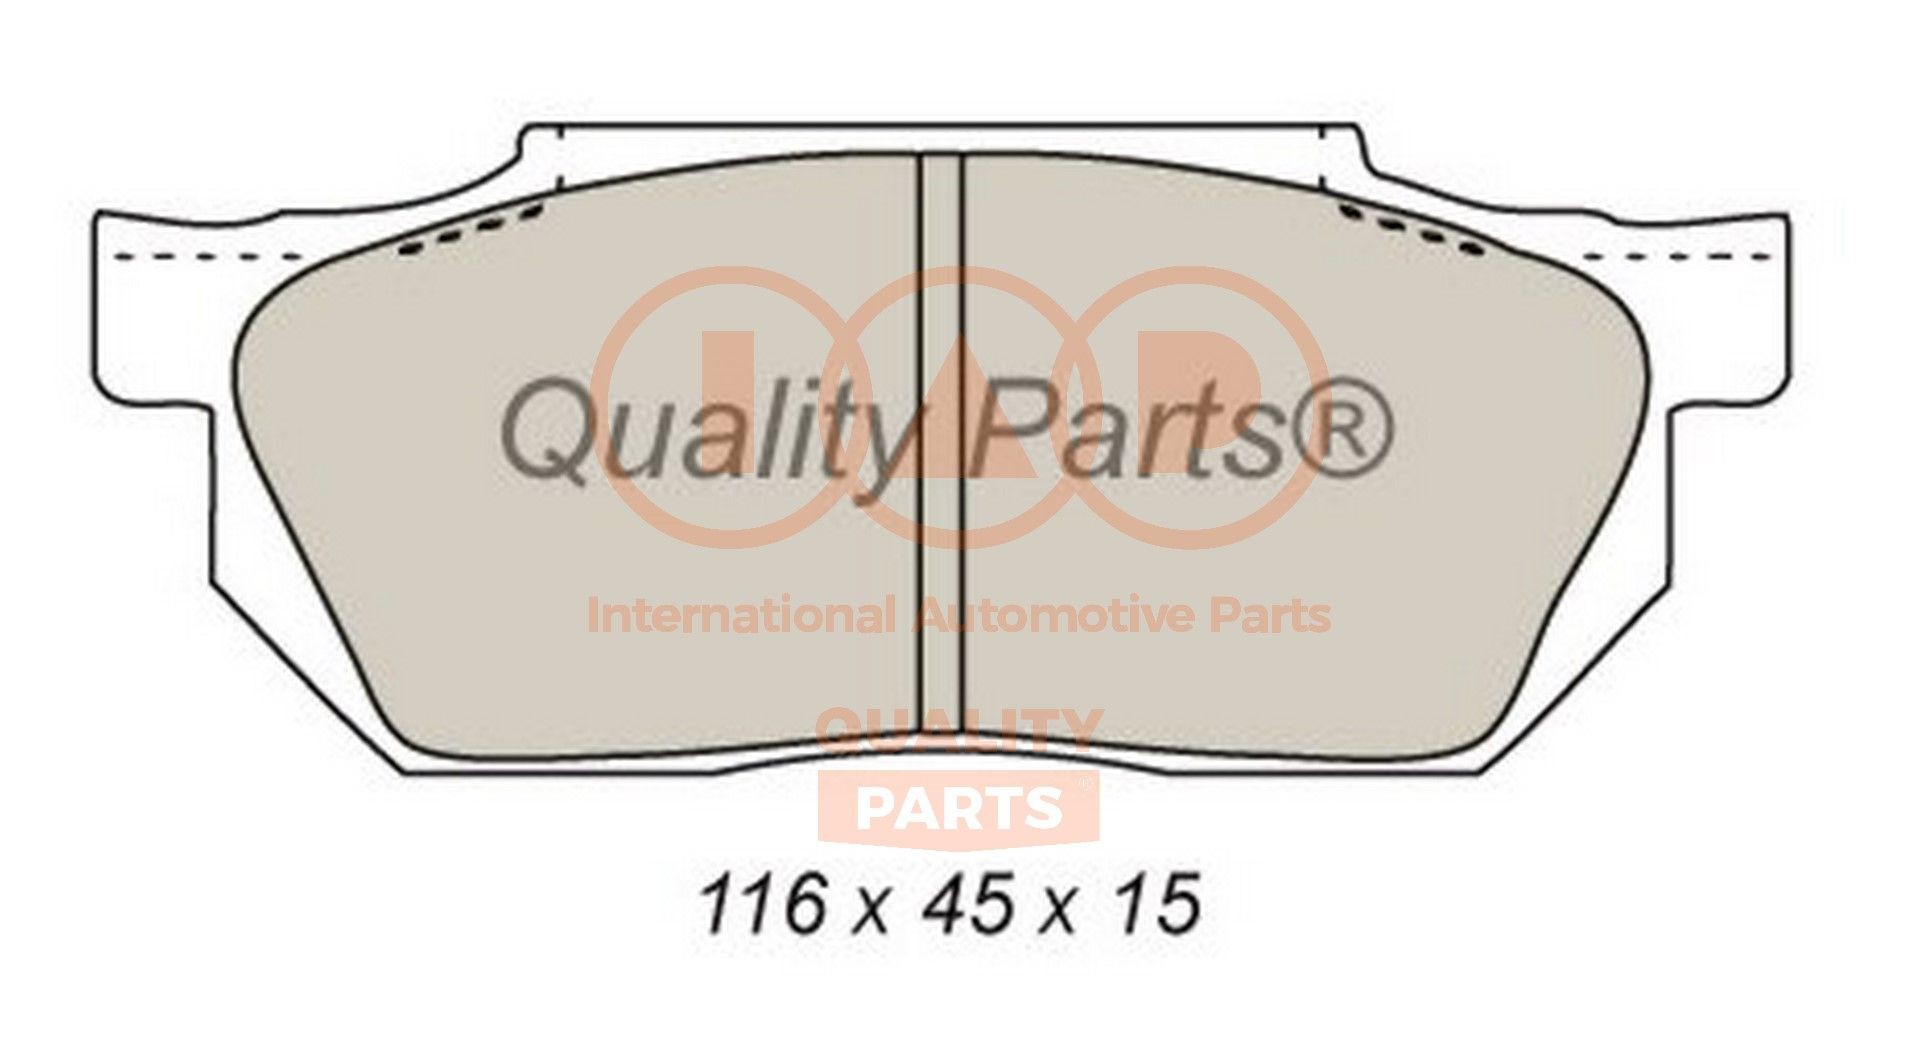 IAP QUALITY PARTS Front Axle Height 1: 45mm, Width 1: 116mm, Thickness 1: 15mm Brake pads 704-06013 buy